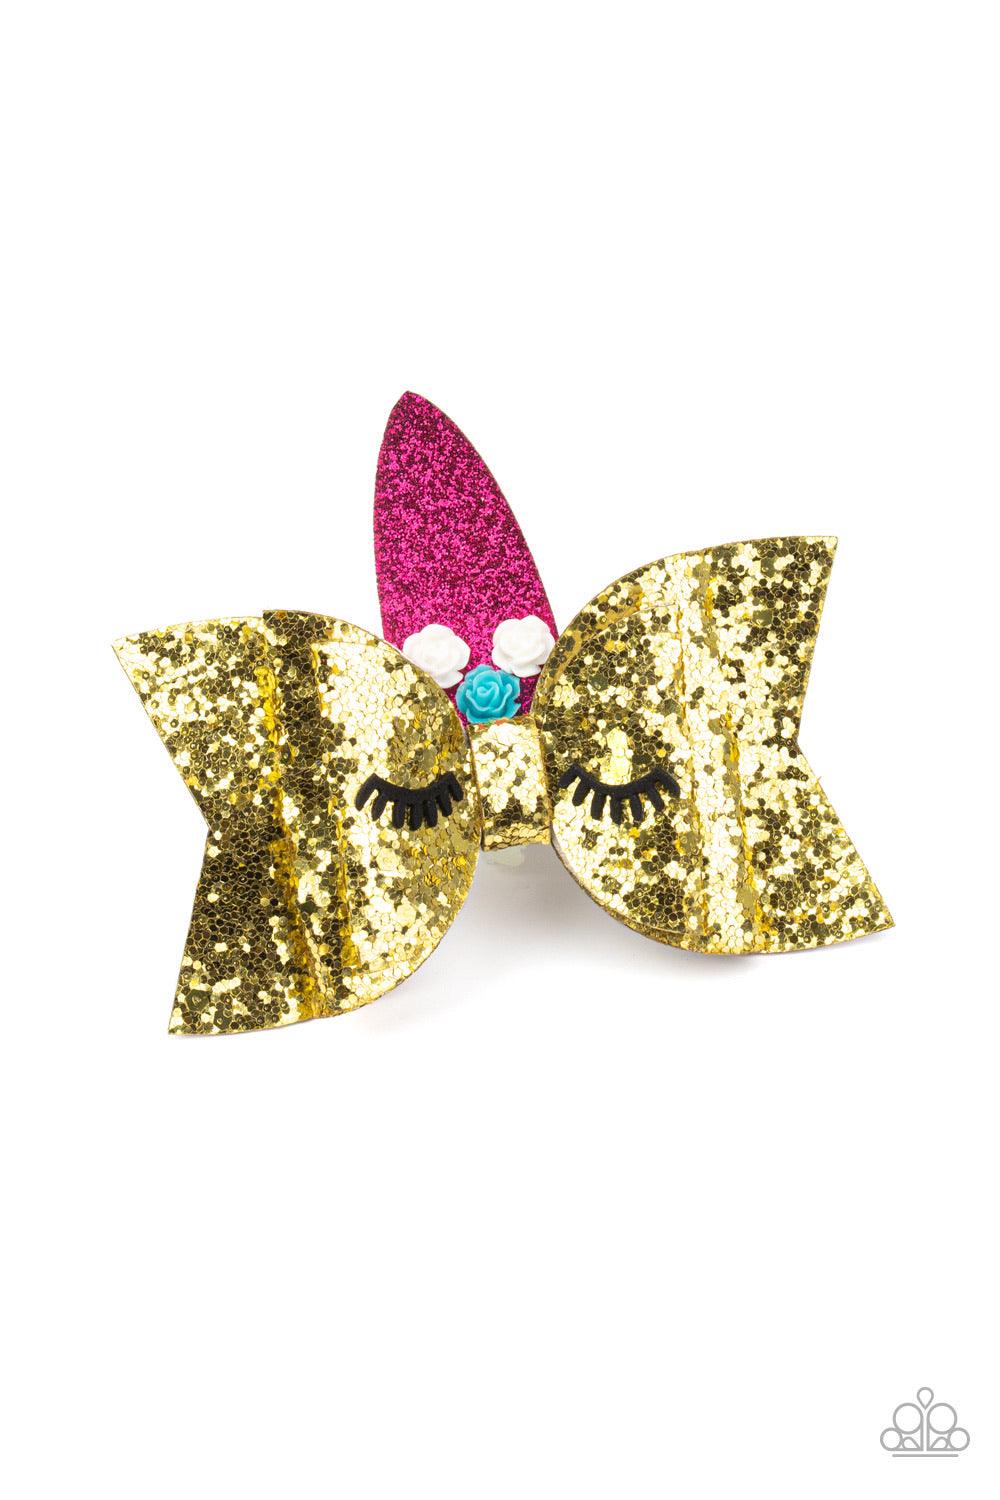 Just Be YOU-nicorn ~Gold - Beautifully Blinged